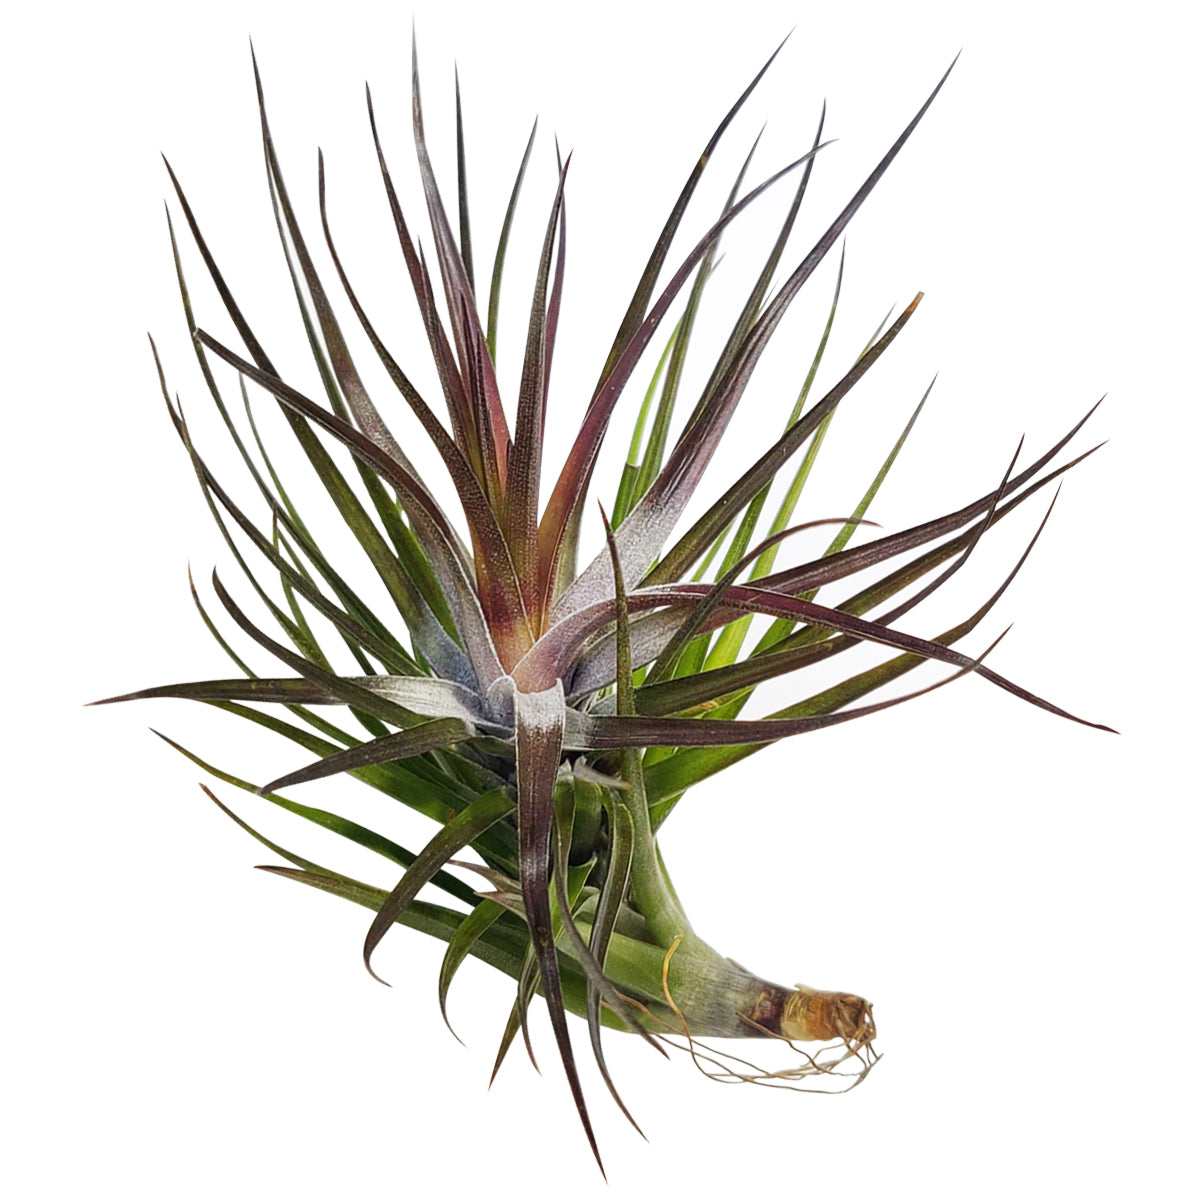 Tillandsia tenuifolia Emerald Forest for sale, Emerald Forest air plant for sale, Air plants subscription box delivered monthly, Air plants gift ideas, Air plants home decor ideas